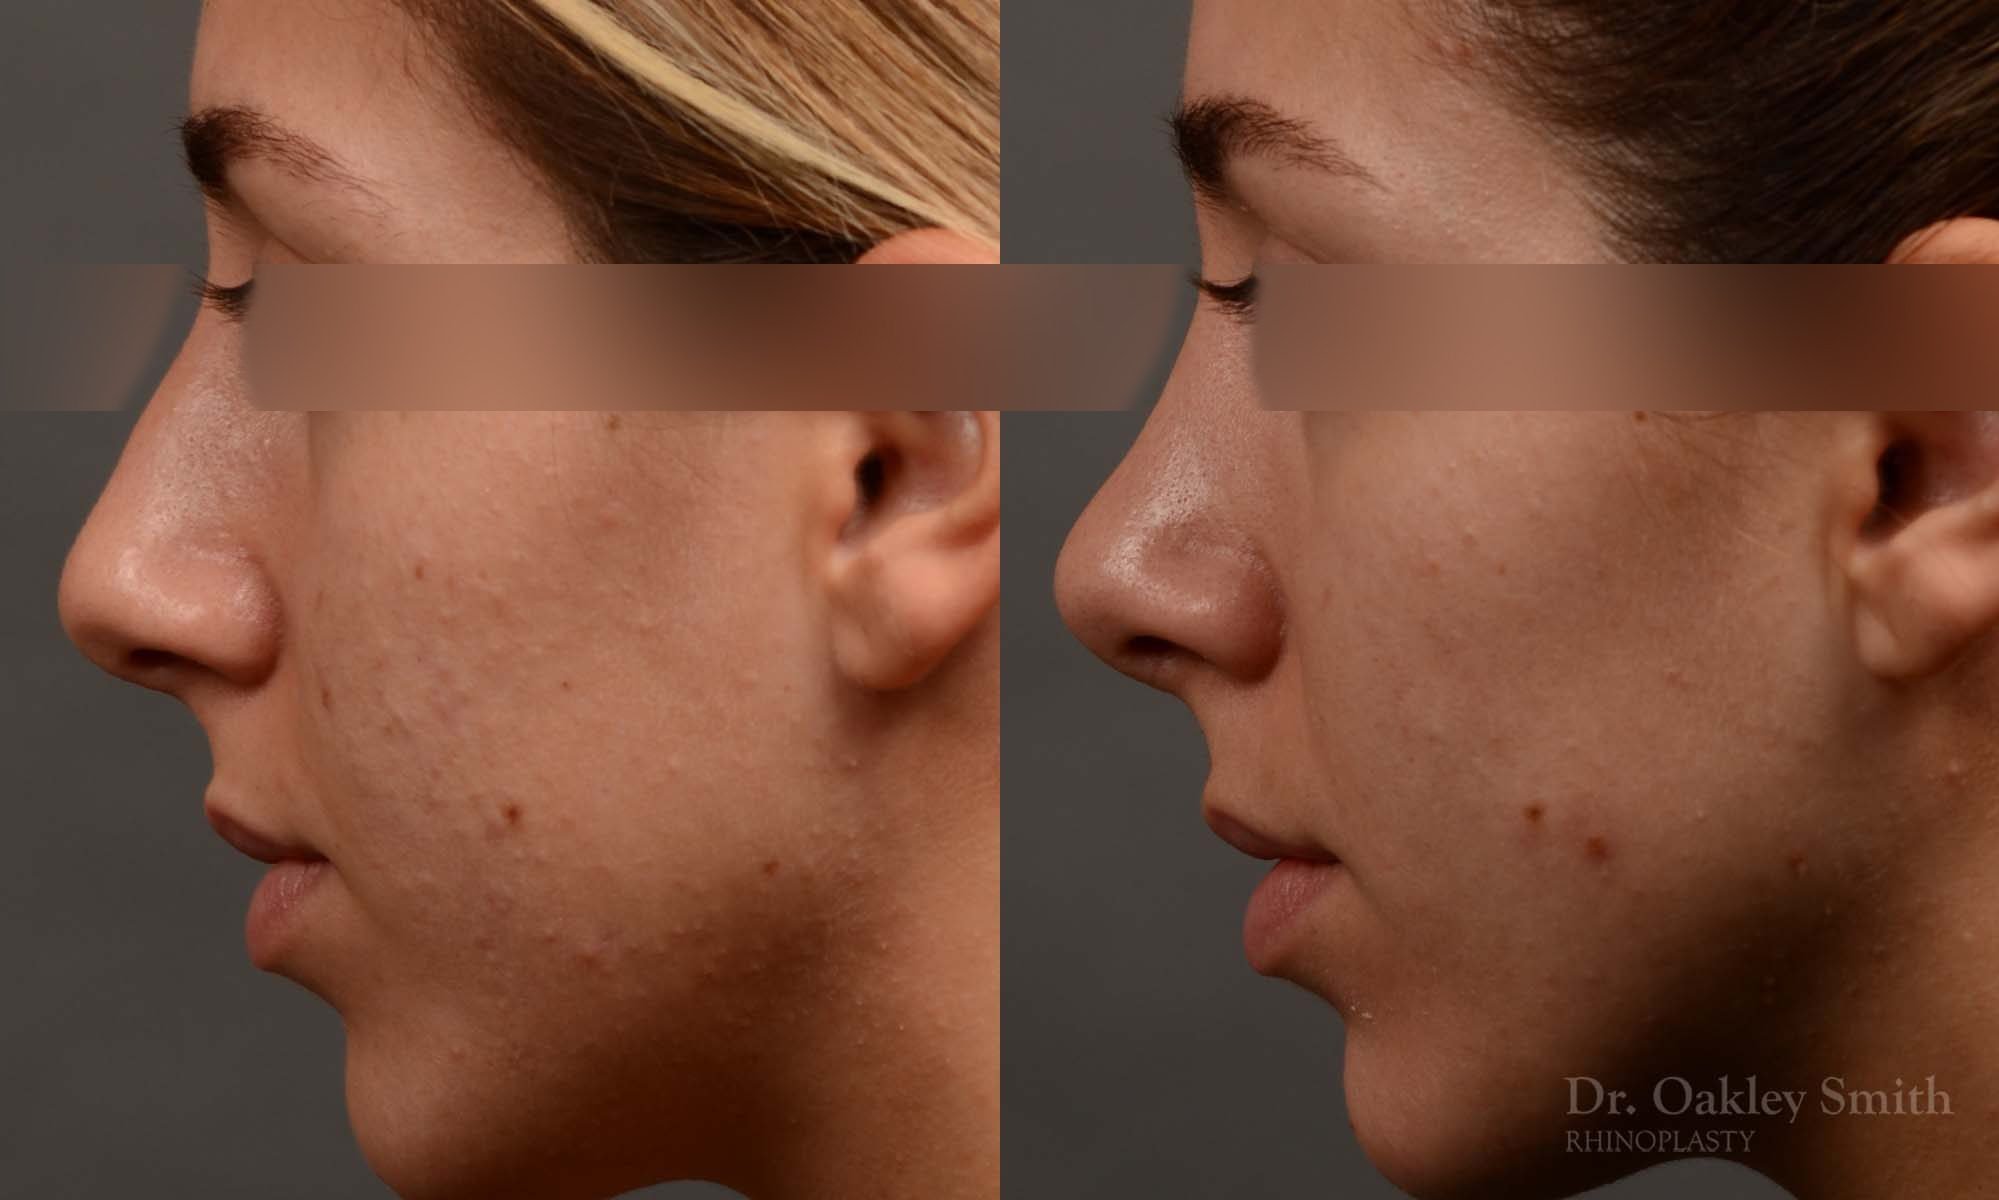 385 - Expert Rhinoplasty nose job surgery to reduce the size of this womans nose.